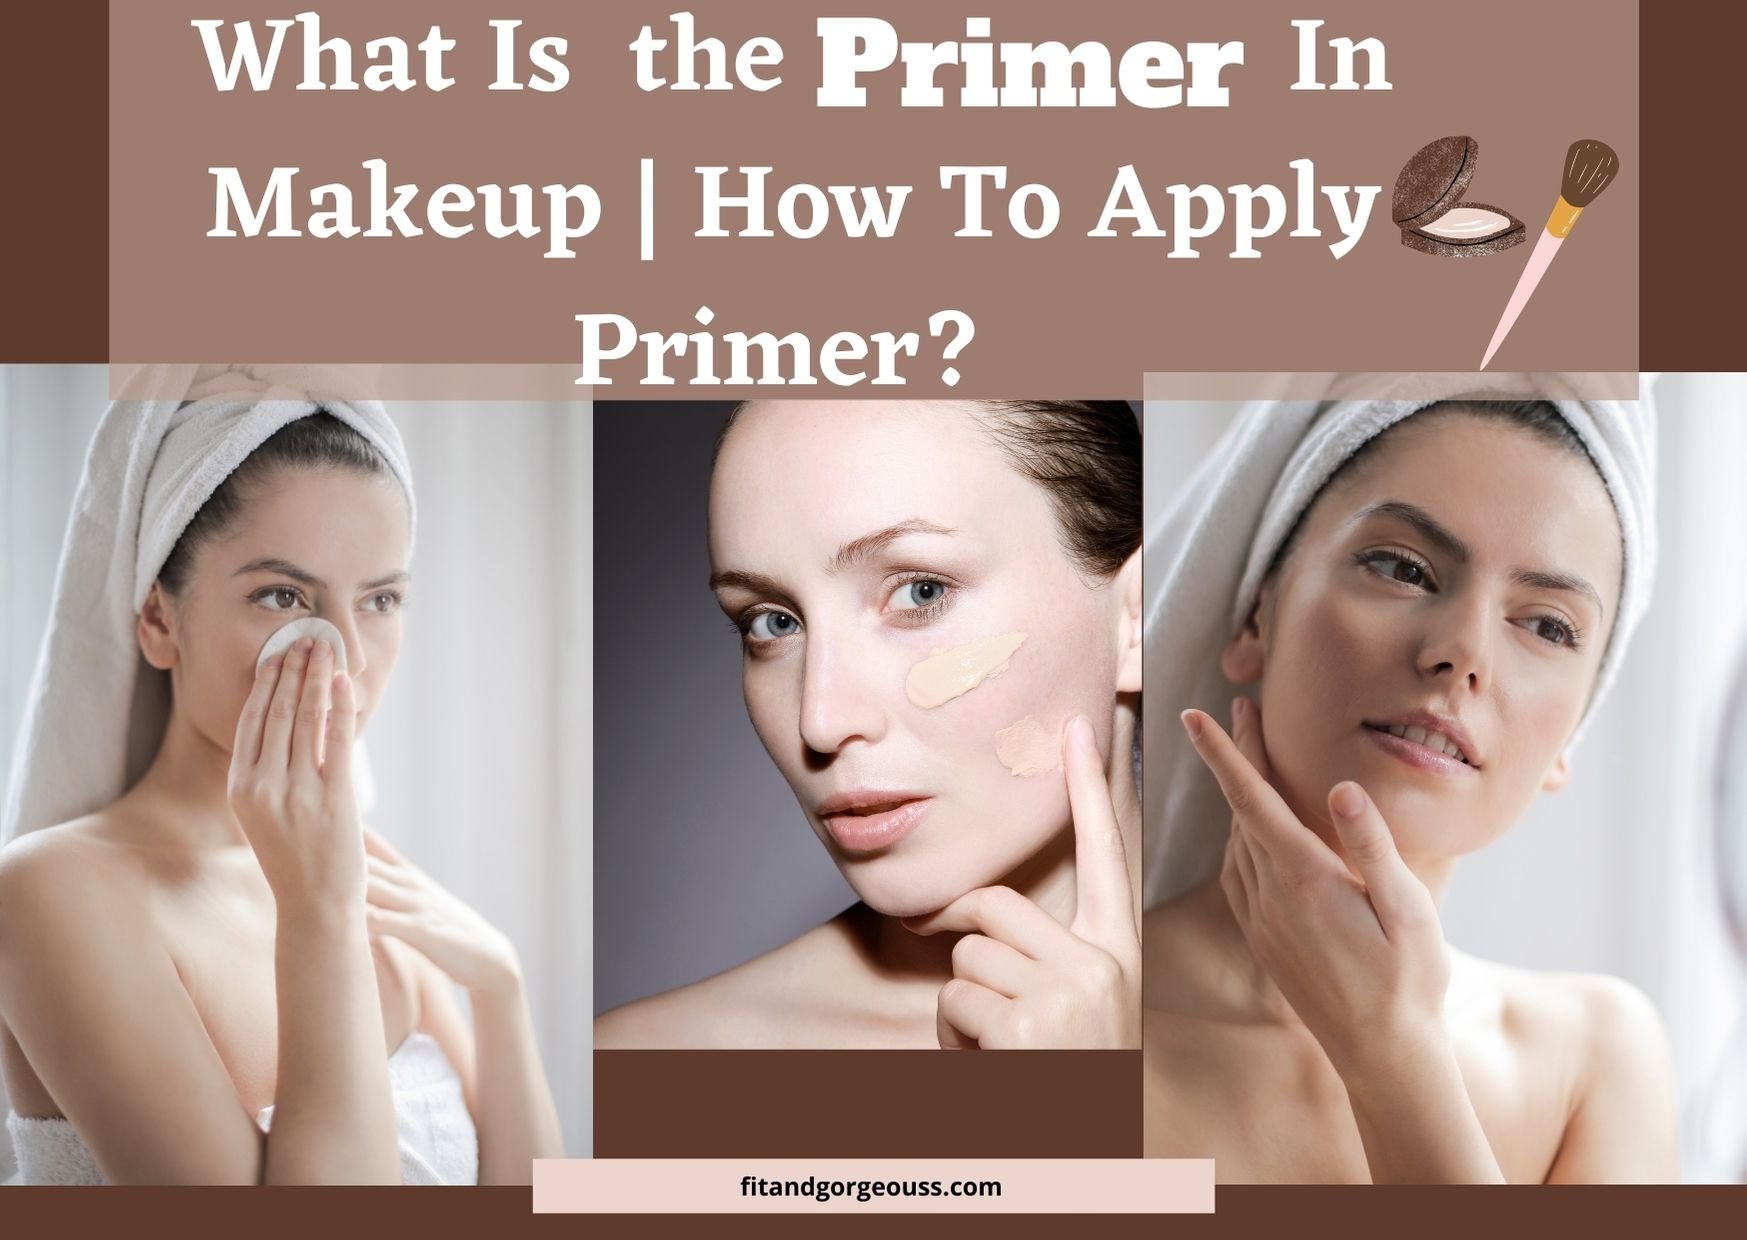 Why use a primer before makeup